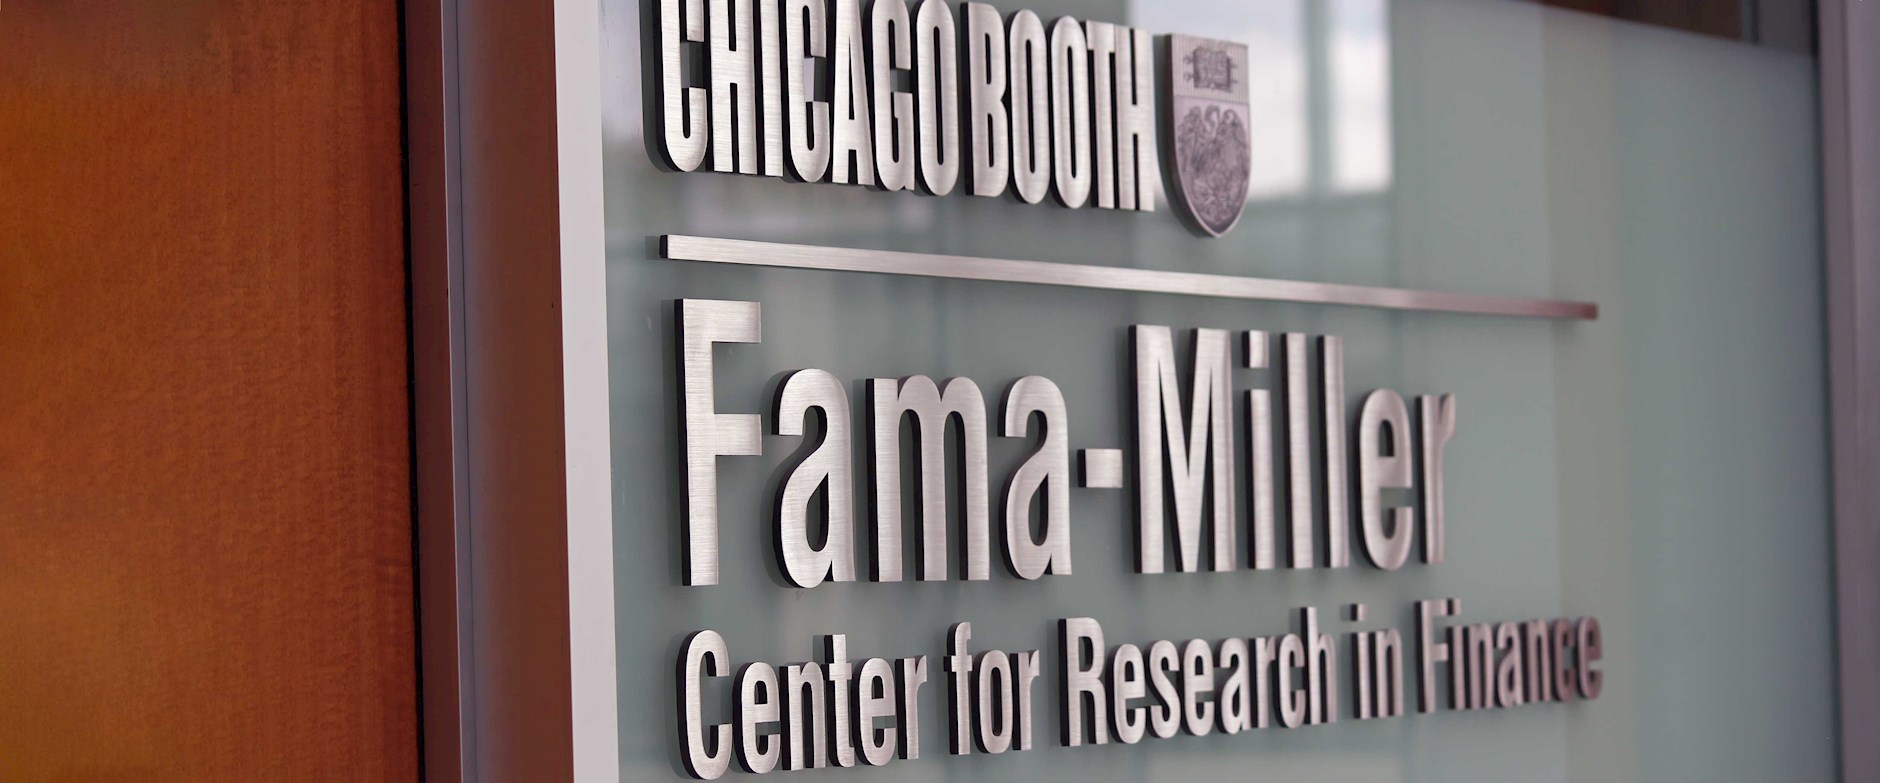 Entrance sign of the Fama-Miller Center for Research in Finance